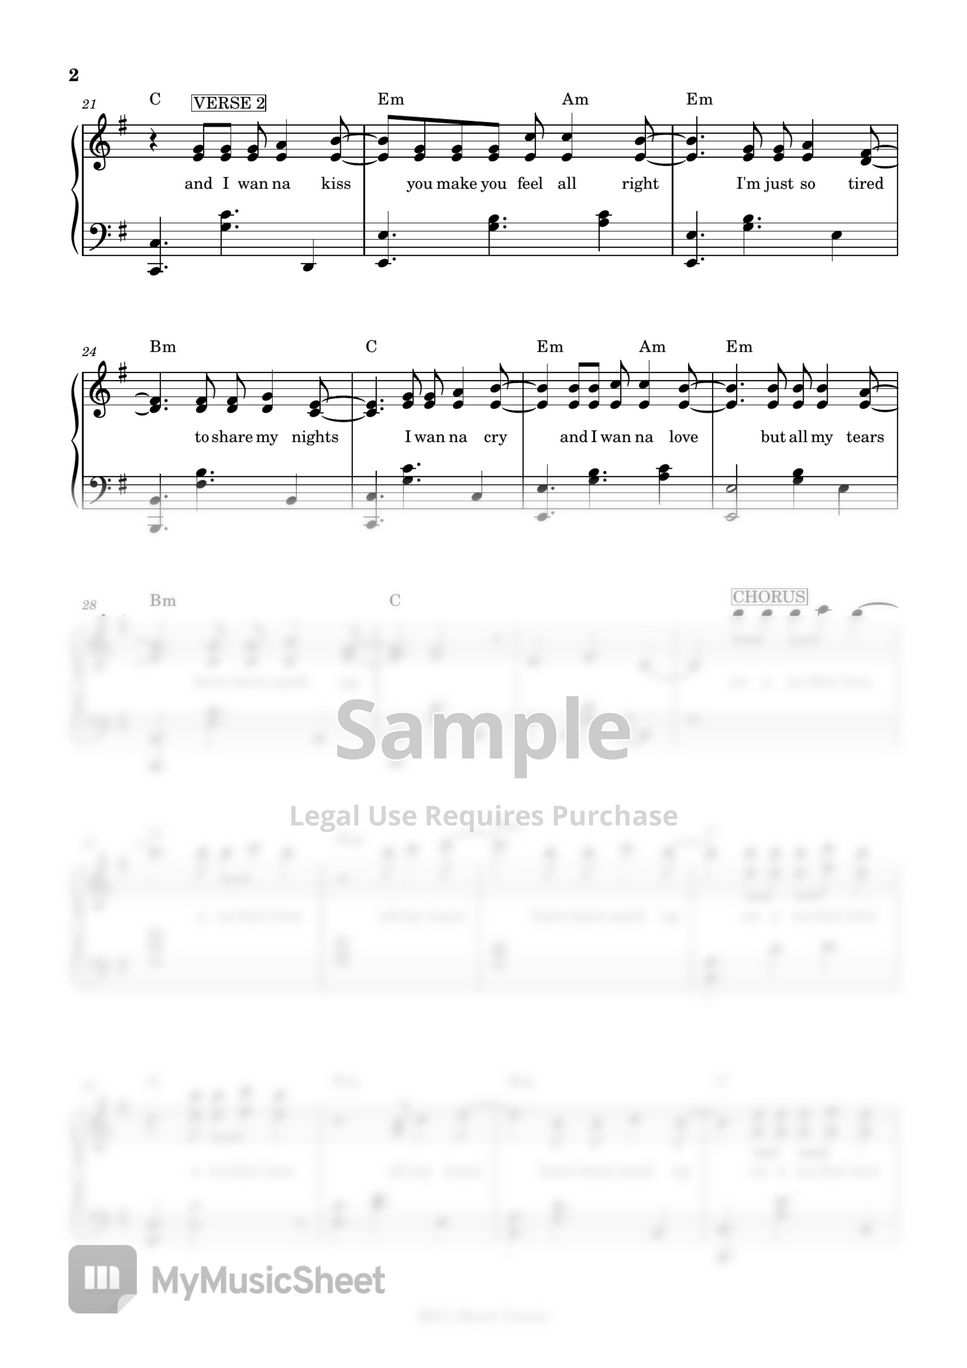 Tom Odell - Another Love (piano sheet music) by Mel's Music Corner